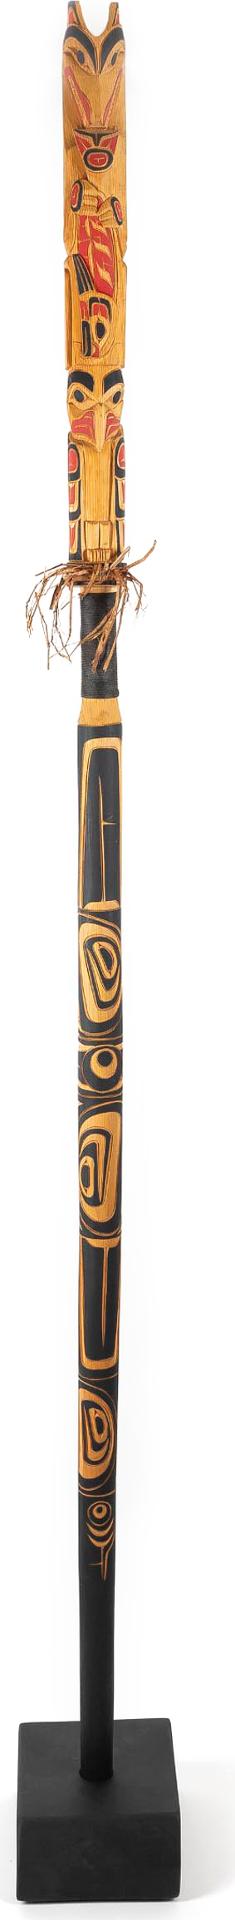 Gus Modeste - Carved And Painted Talking Stick On A Stand, 2005